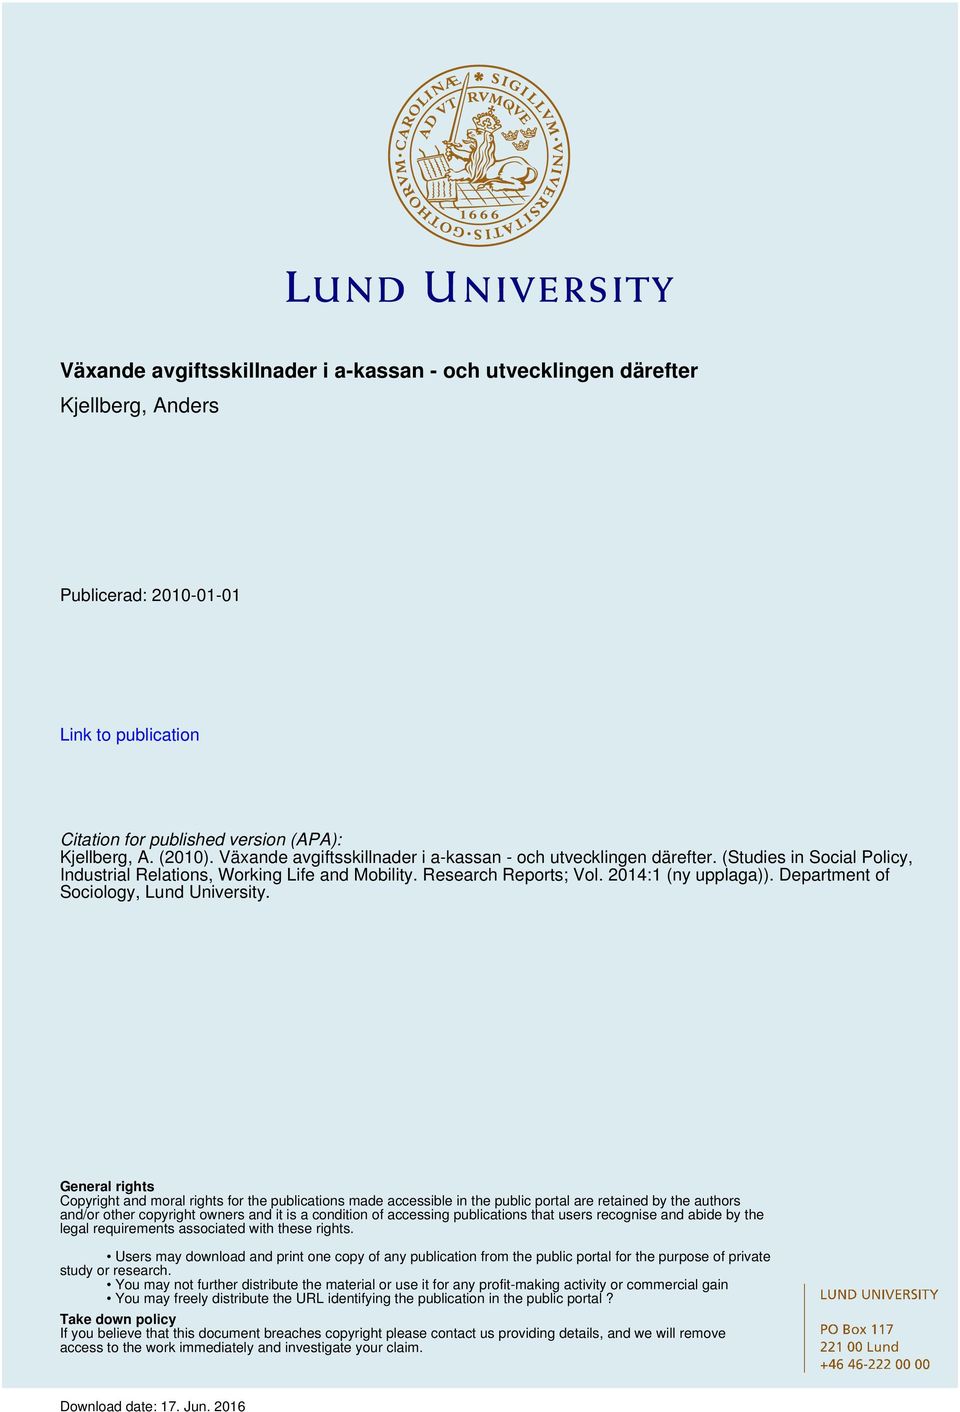 Department of Sociology, Lund University.